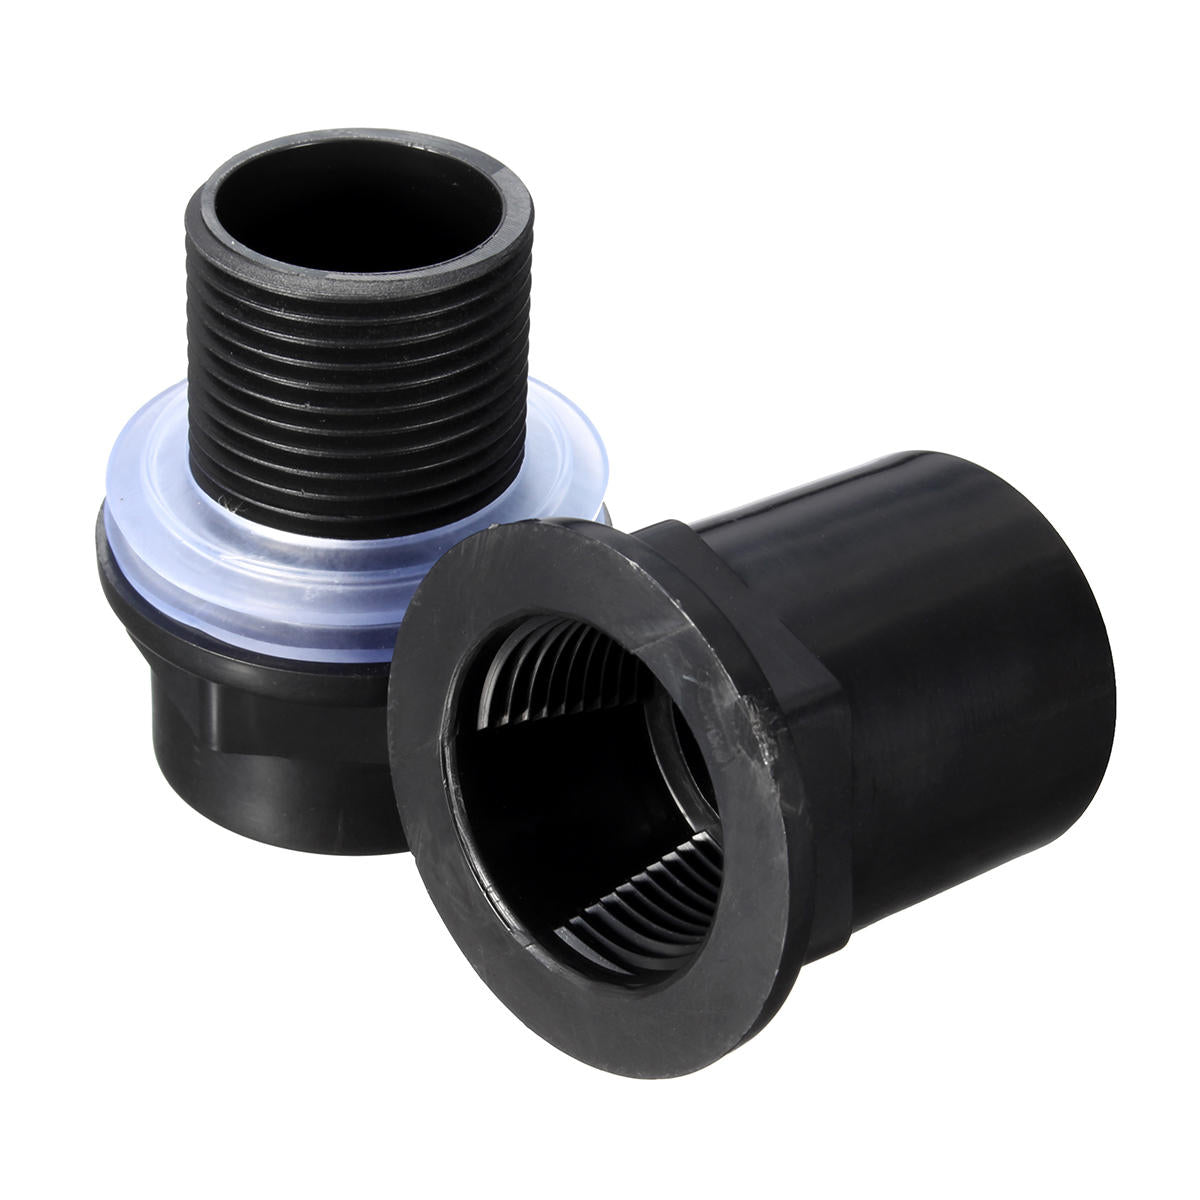 Aquarium PVC Connector Plastic PVC Pipe Butt Fish Tank Straight Up Pipe Fitting Joint Connection